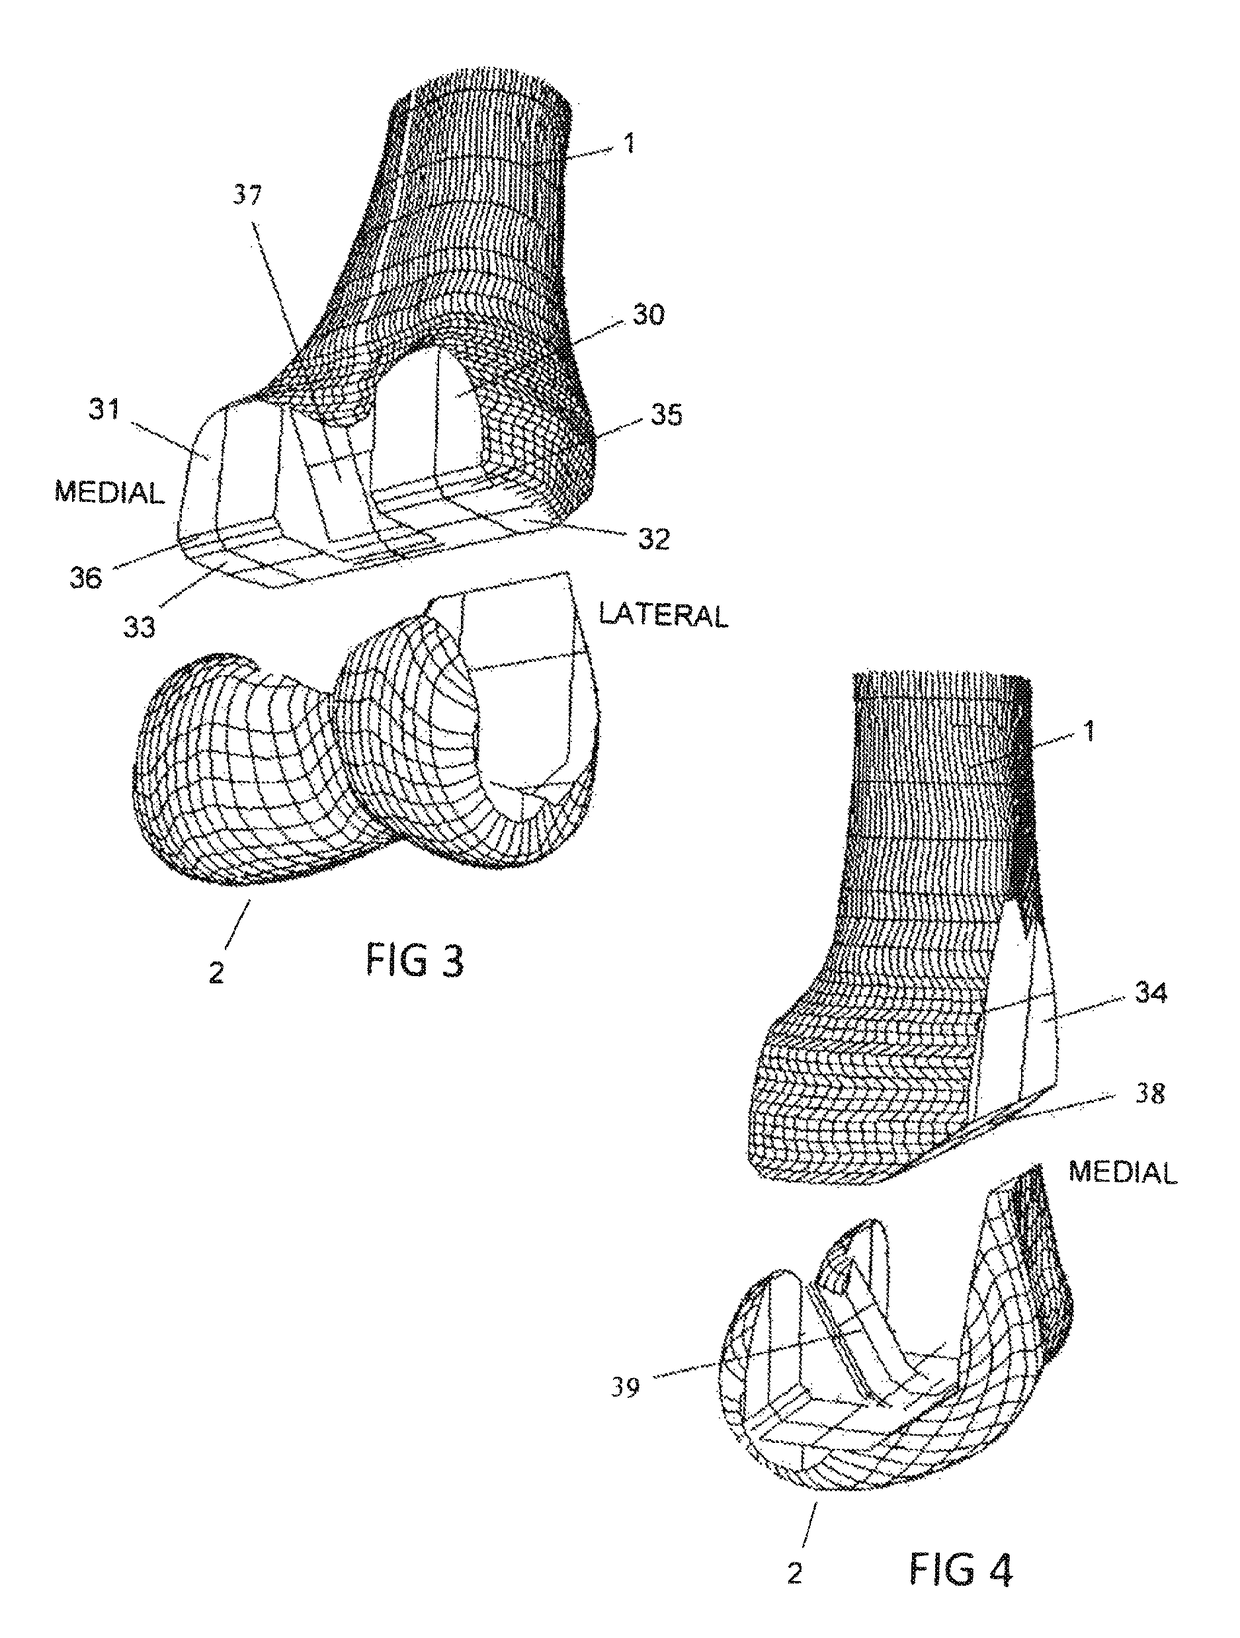 Total knee replacement implant based on normal anatomy and kinematics